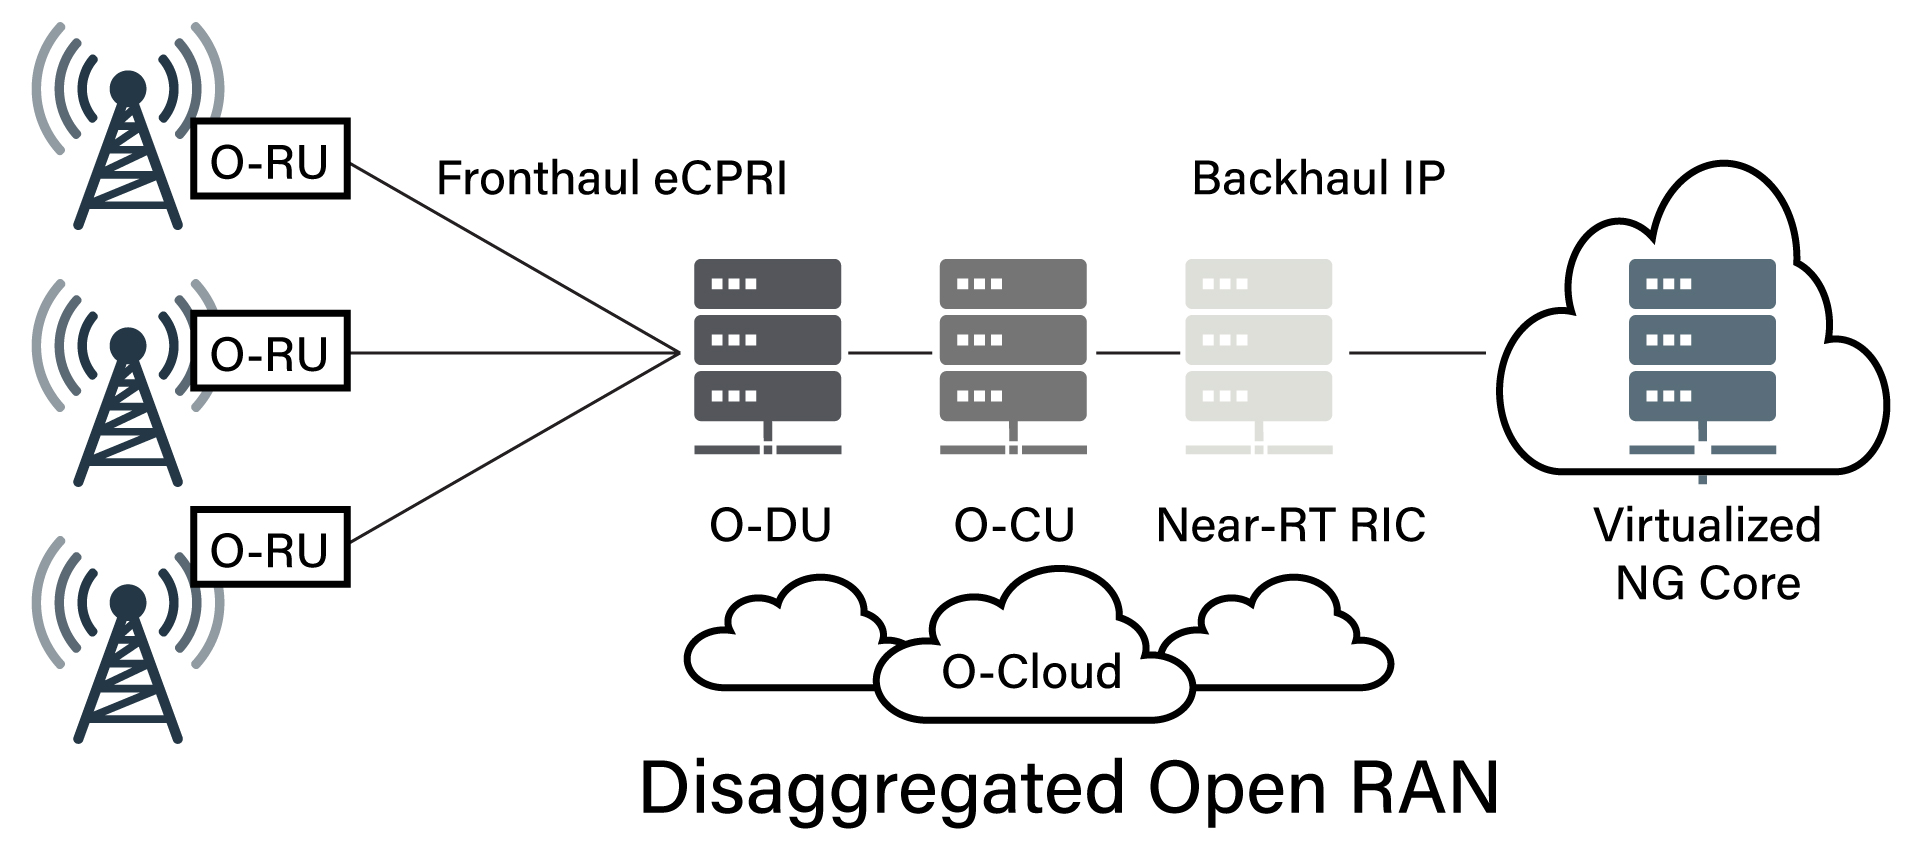 Diagram of Disaggregated Open RAN including Fronthaul eCPRI and Backhaul IP